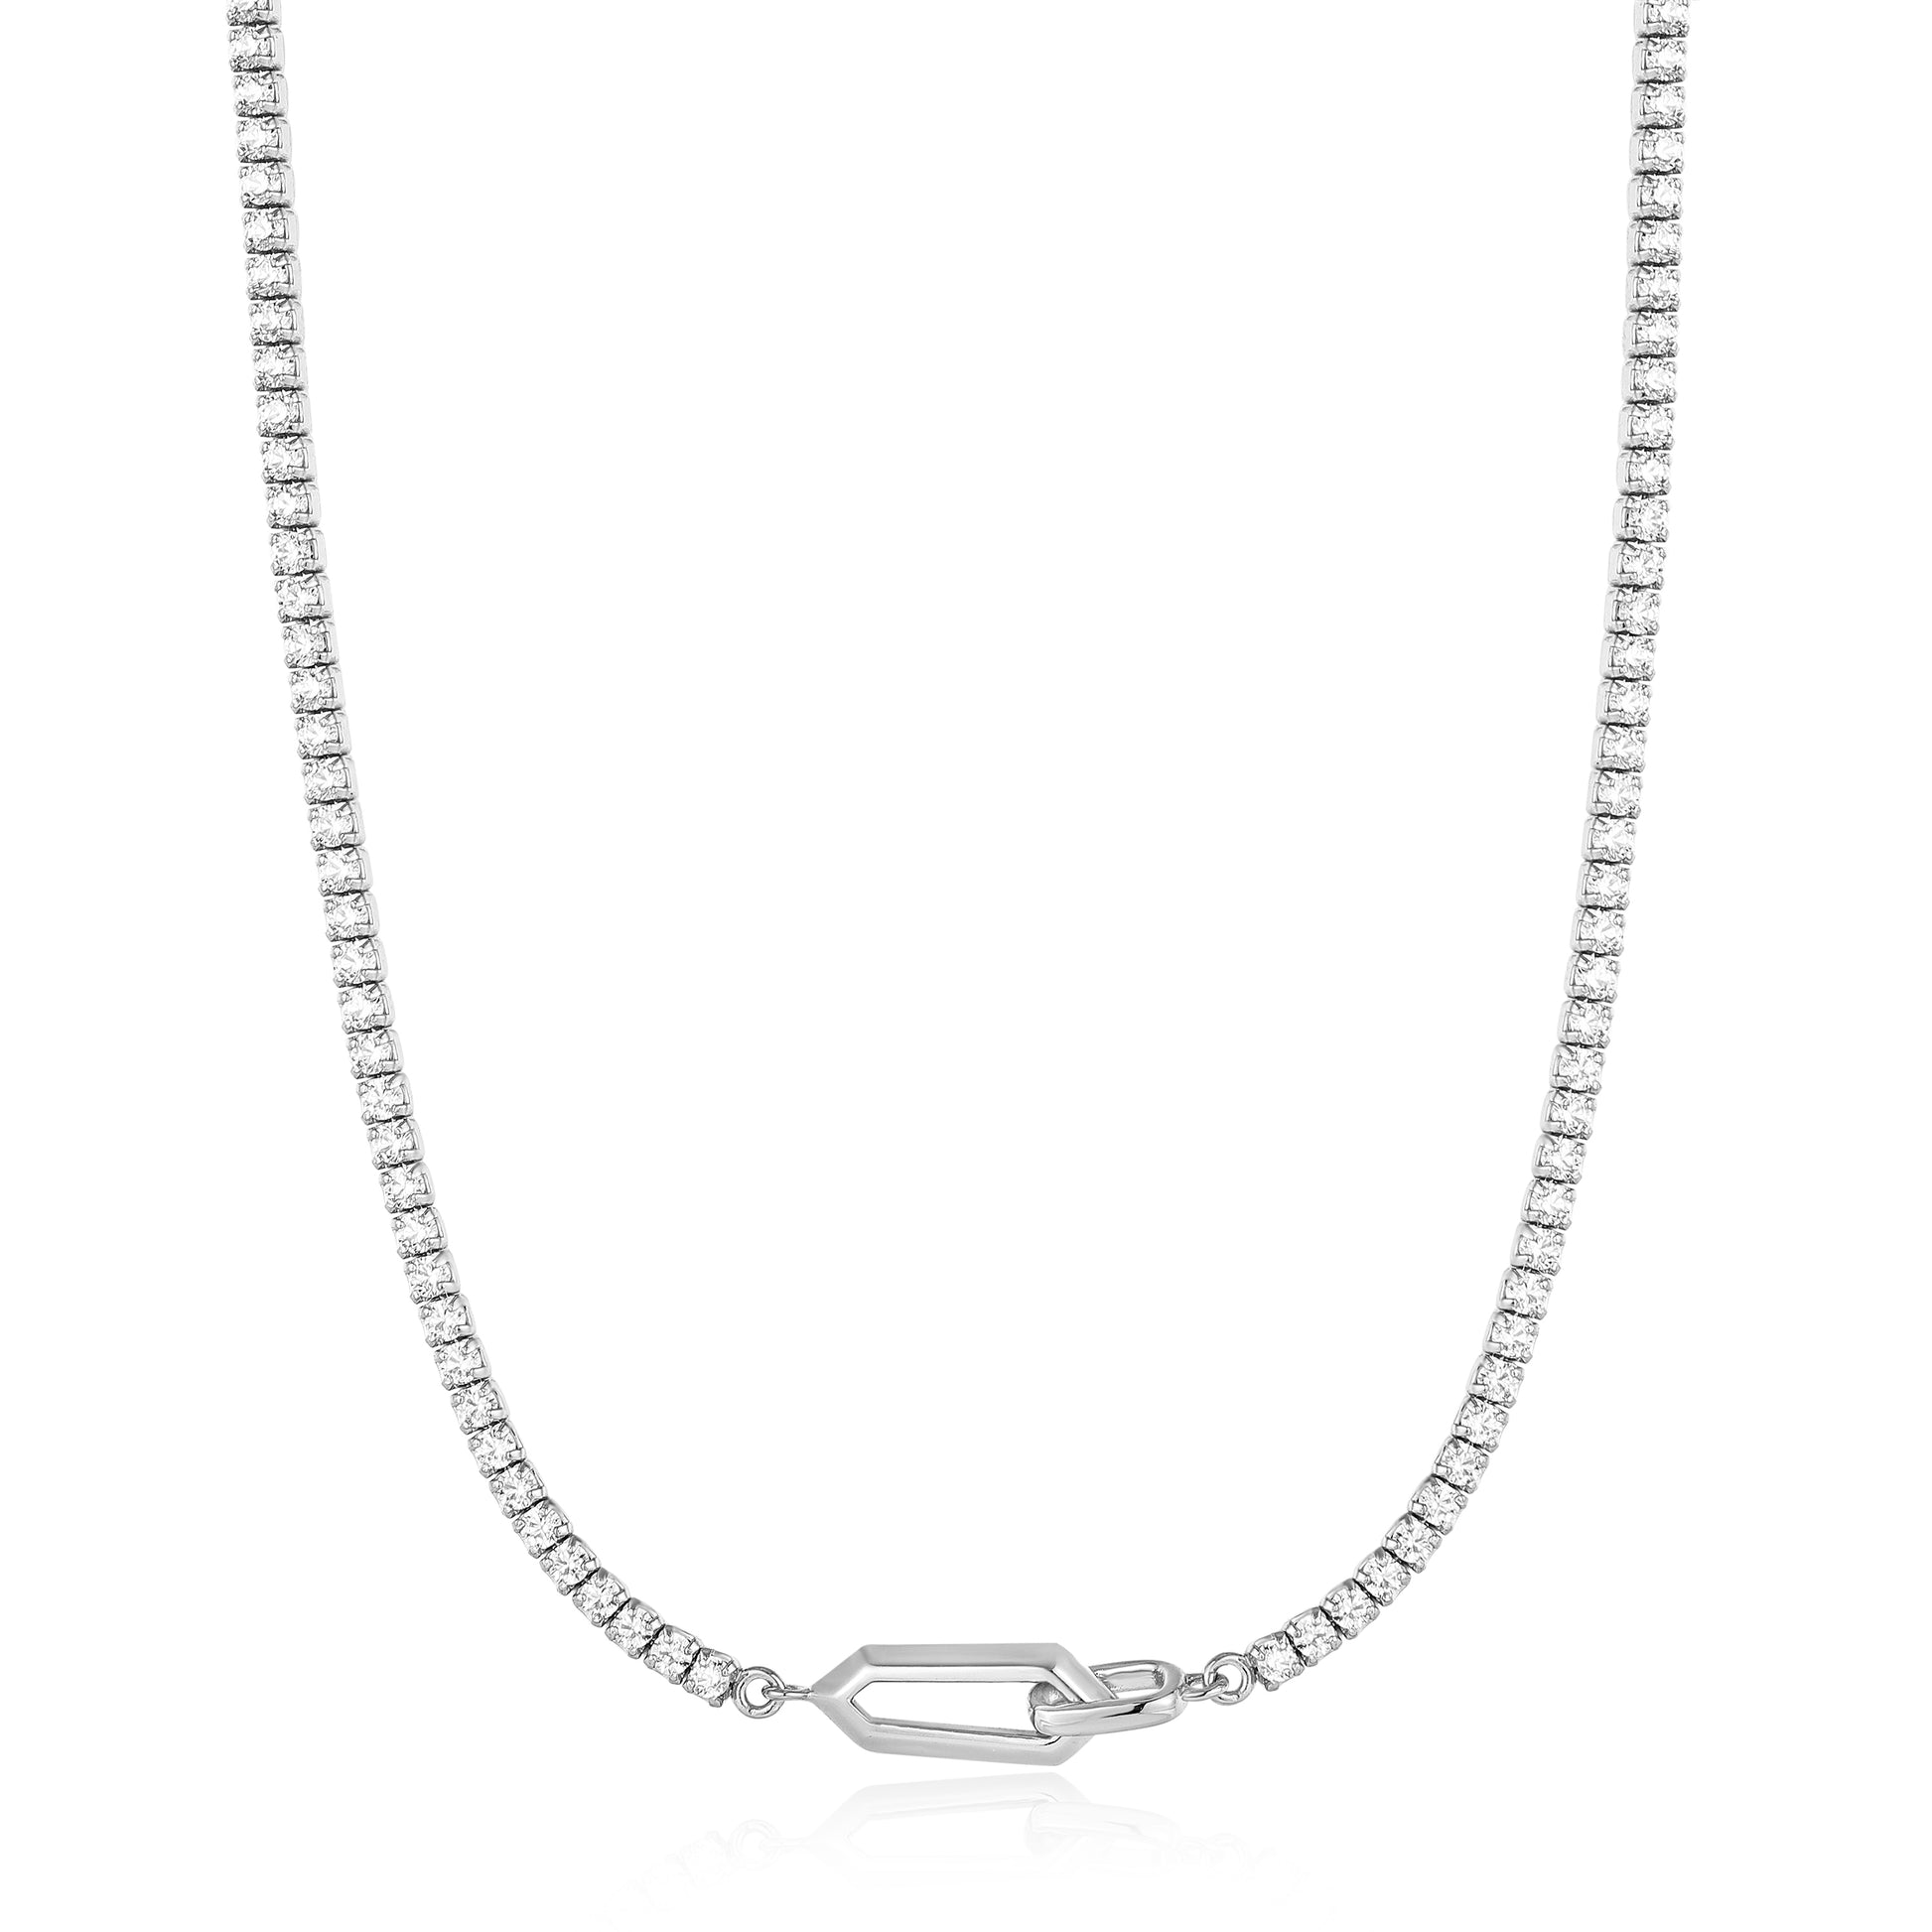 Ania Haie Silver Sparkle Chain Interlock Necklace - Silver Necklace